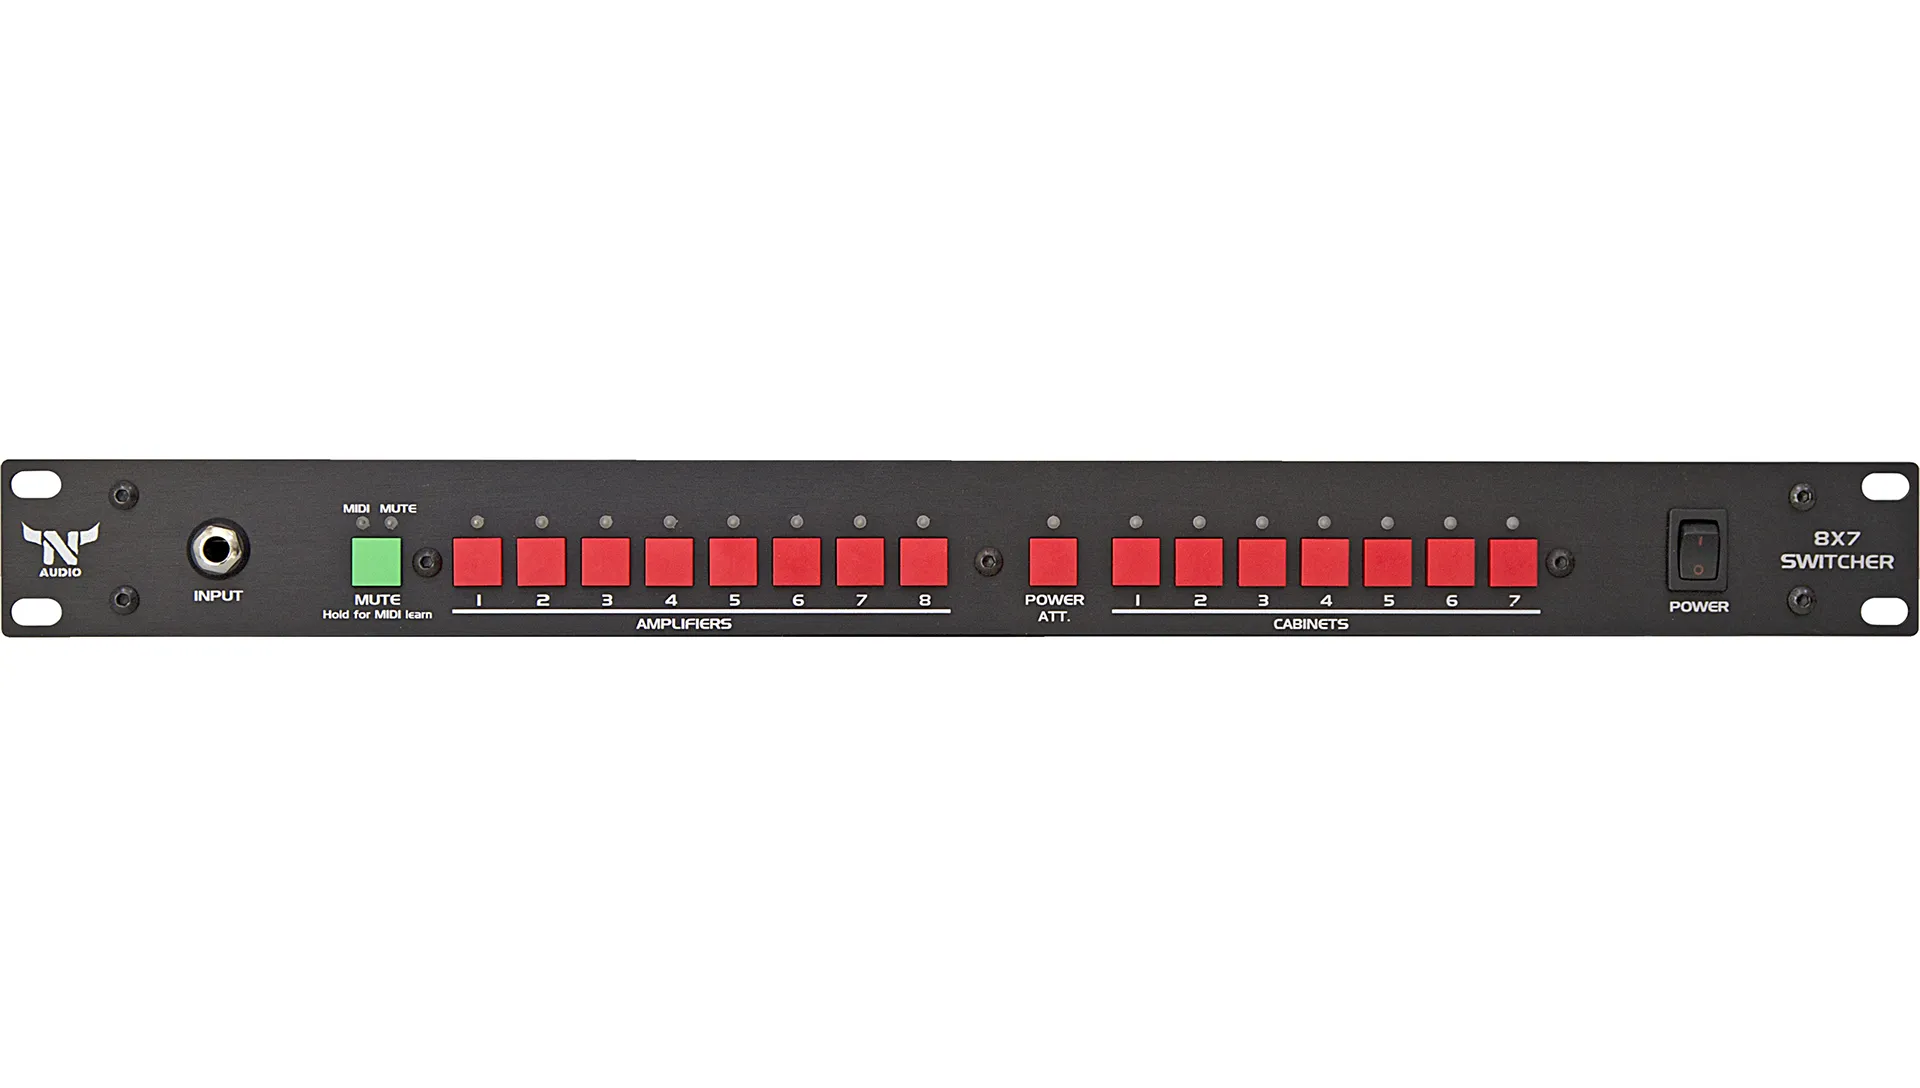 8X7 Amp Cabinet Switcher - Front Panel